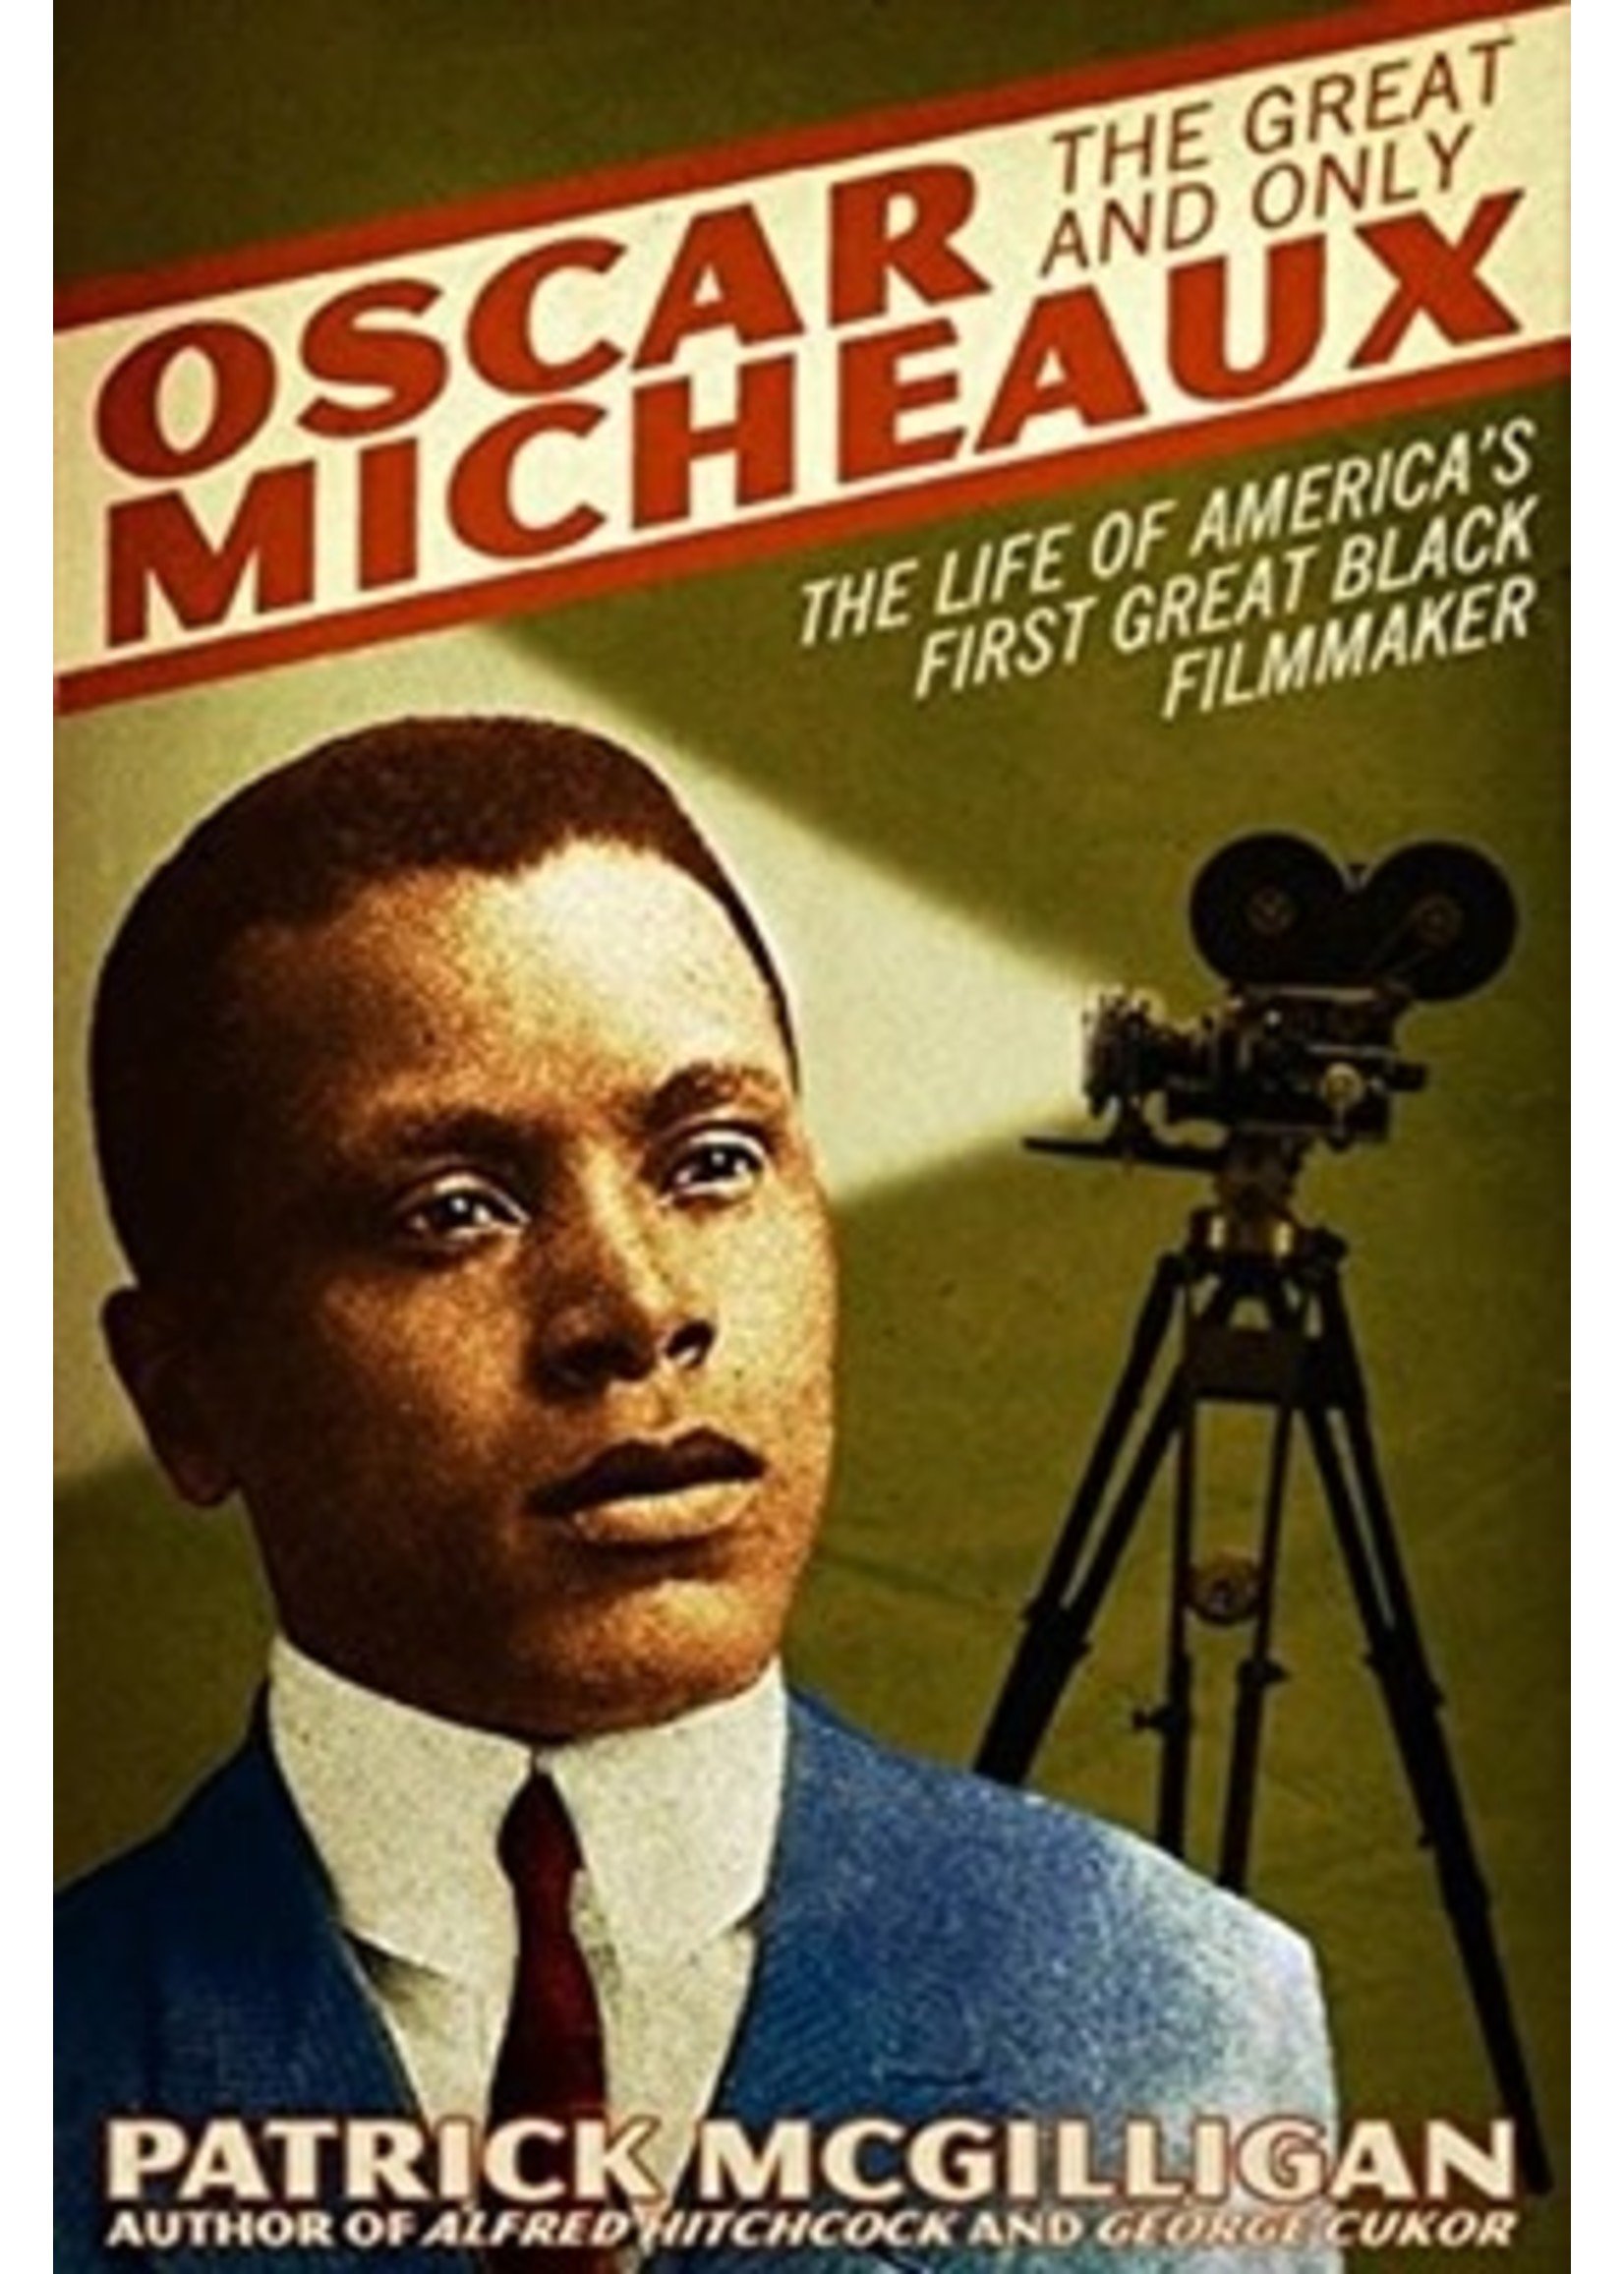 Great and Only Oscar Micheaux: Life of America's First Black Movie Director